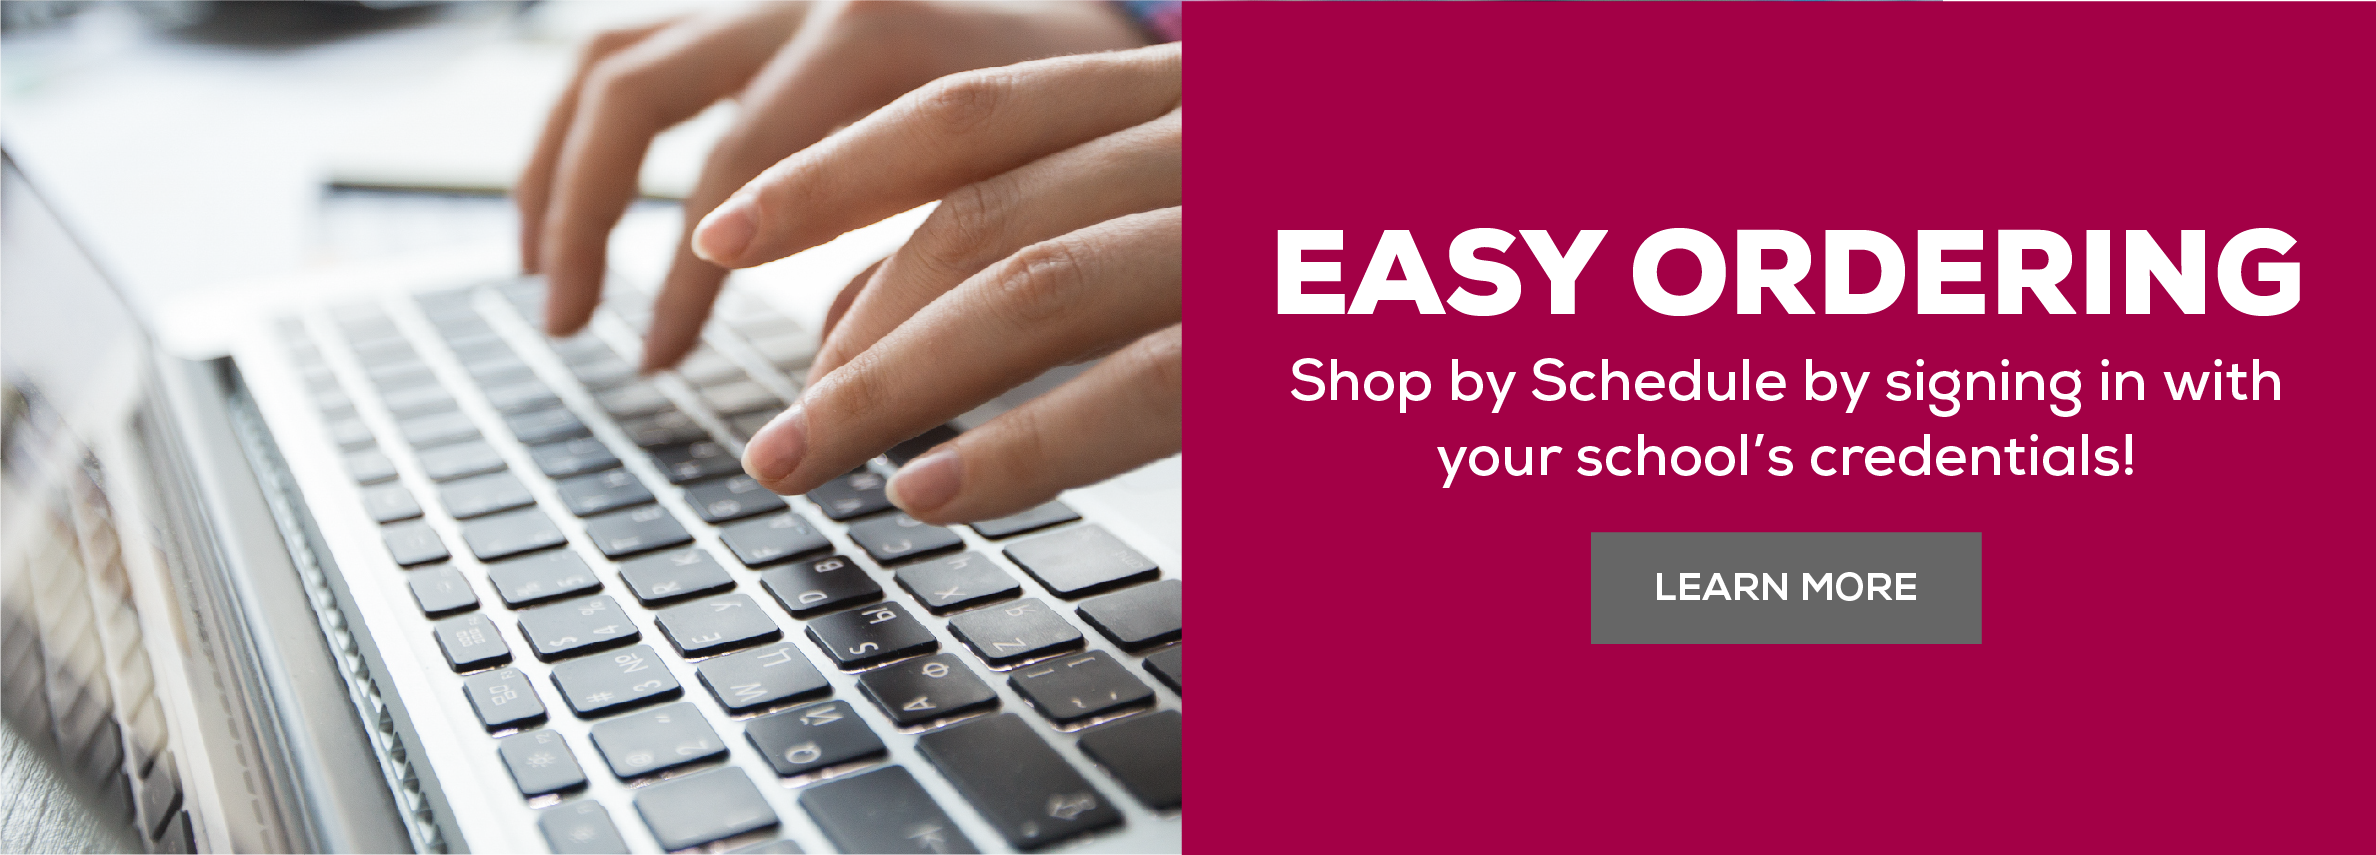 Easy Ordering. Shop by Schedule by signing in with your school's credentials! Learn more